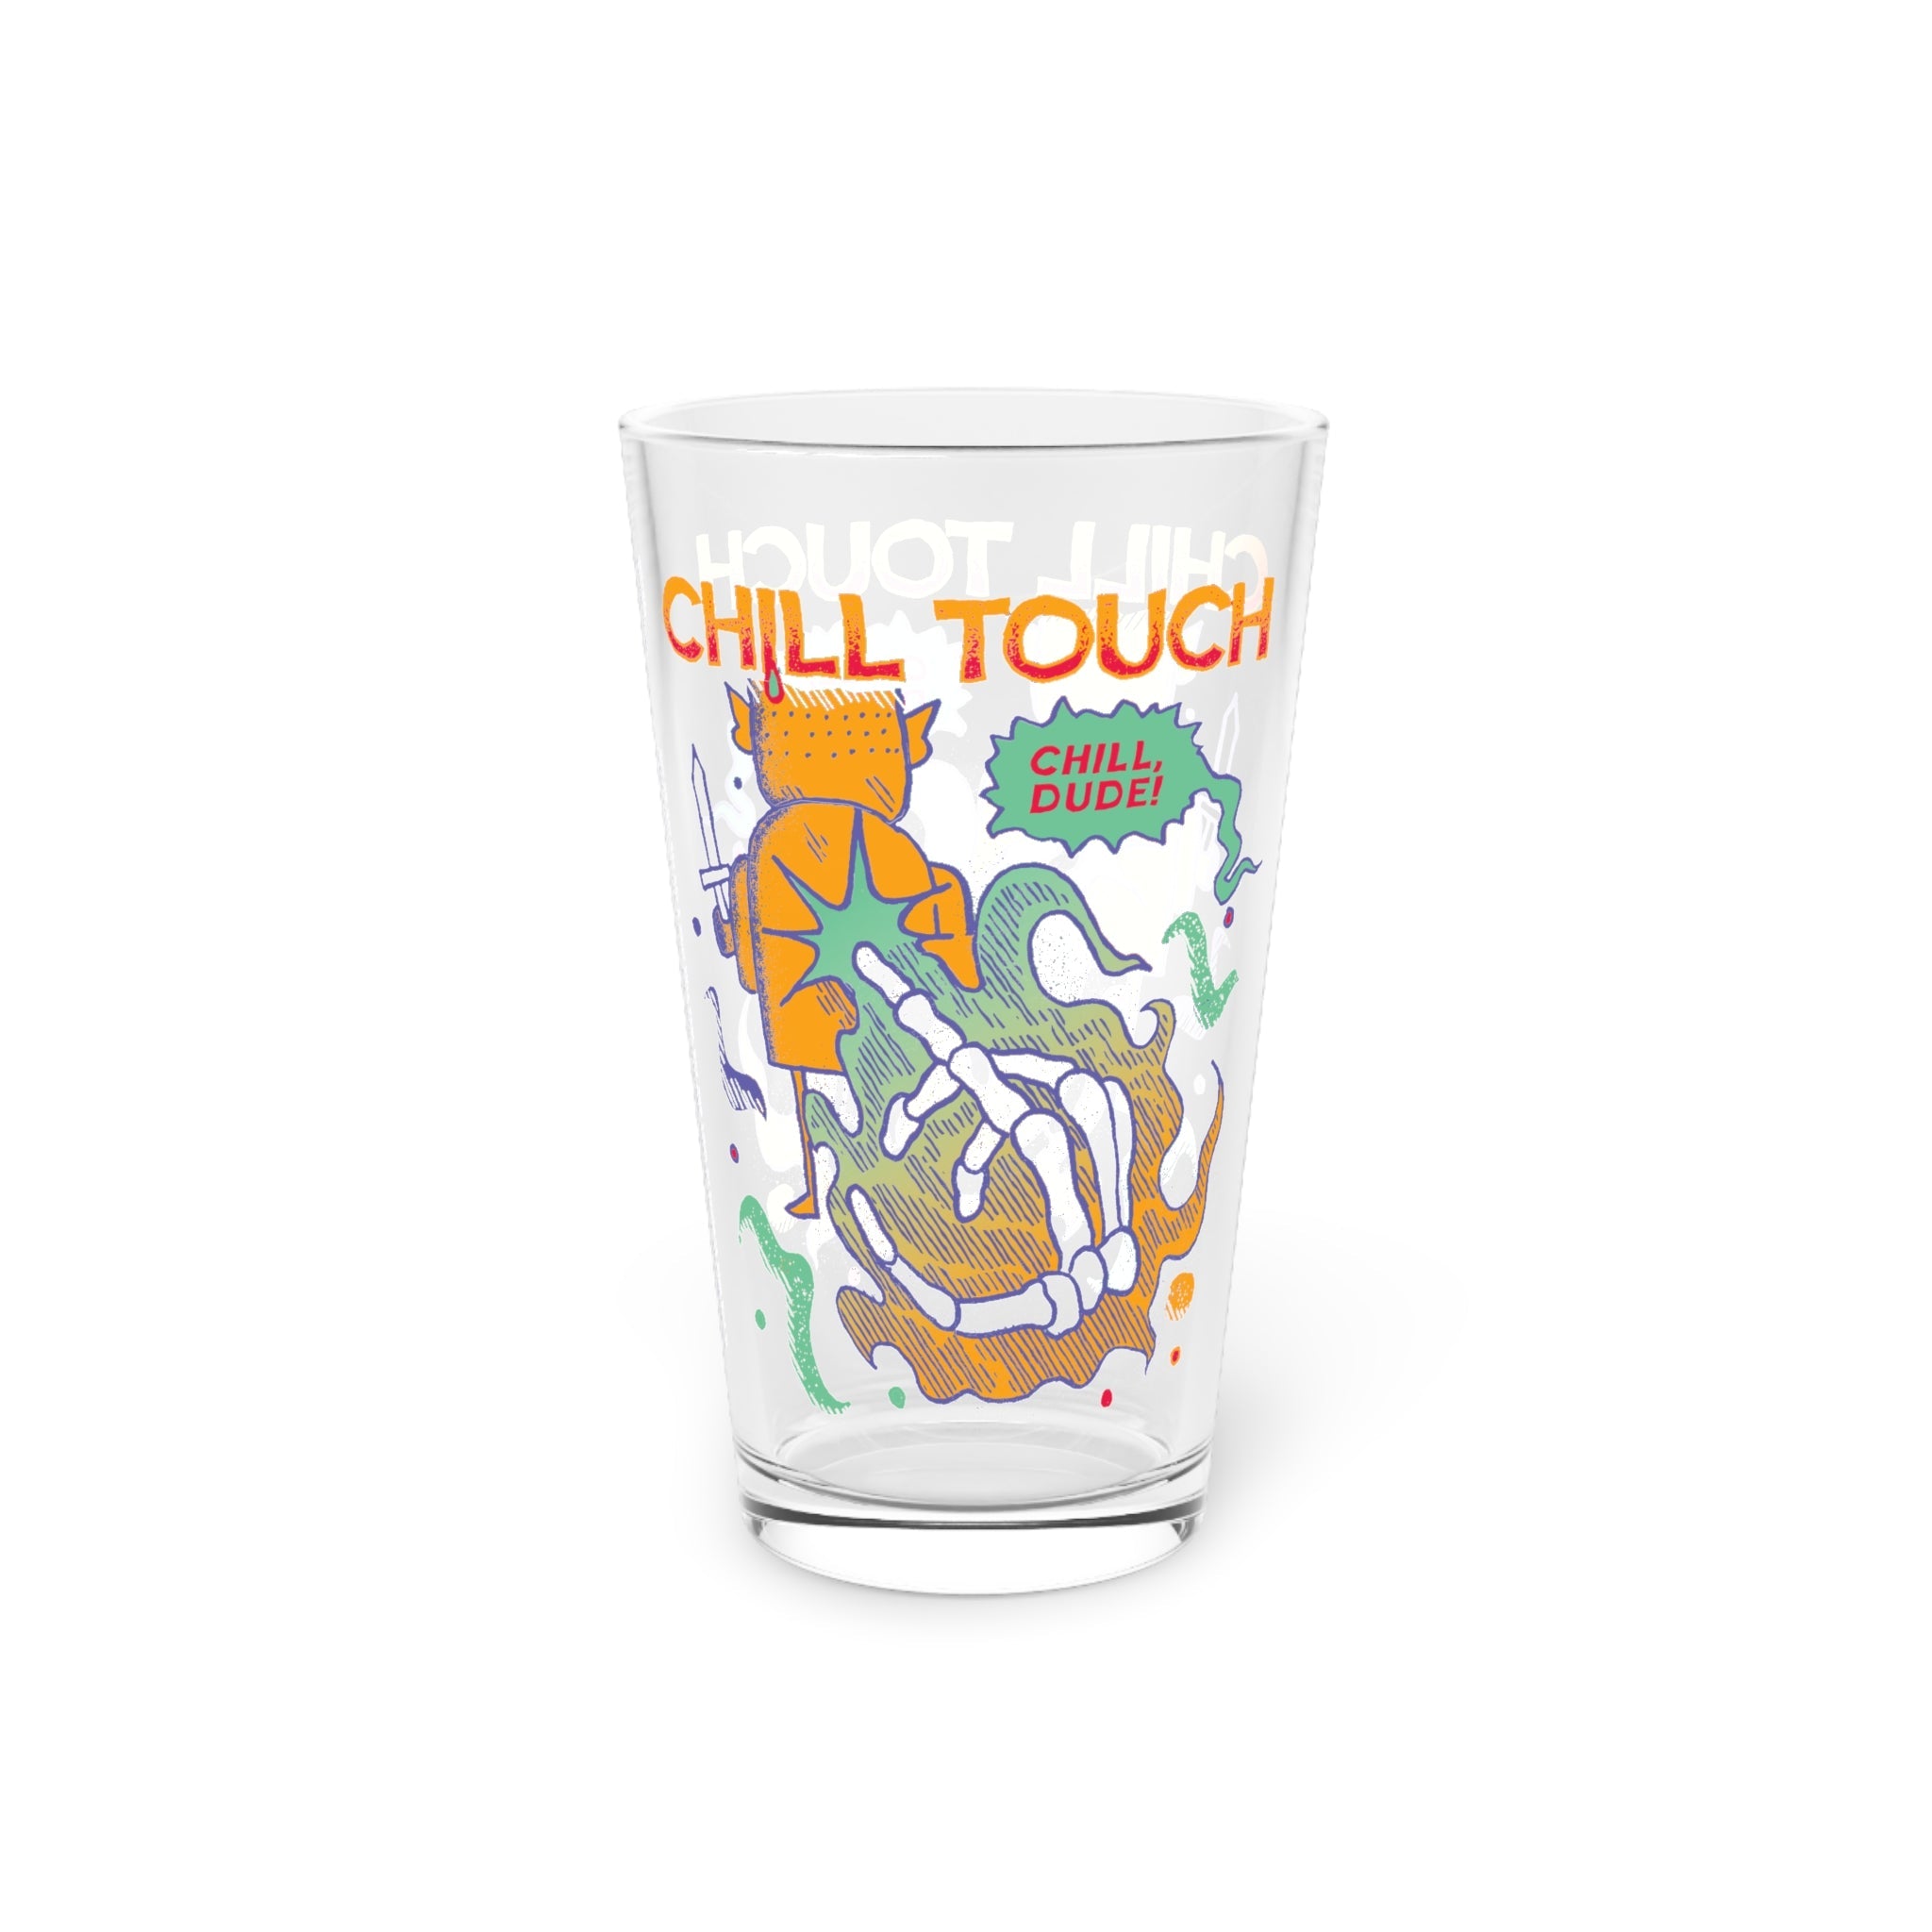 Chill Touch | Pint Glass, 16oz - Drinkware Sets - Ace of Gnomes - 63829116595892833116